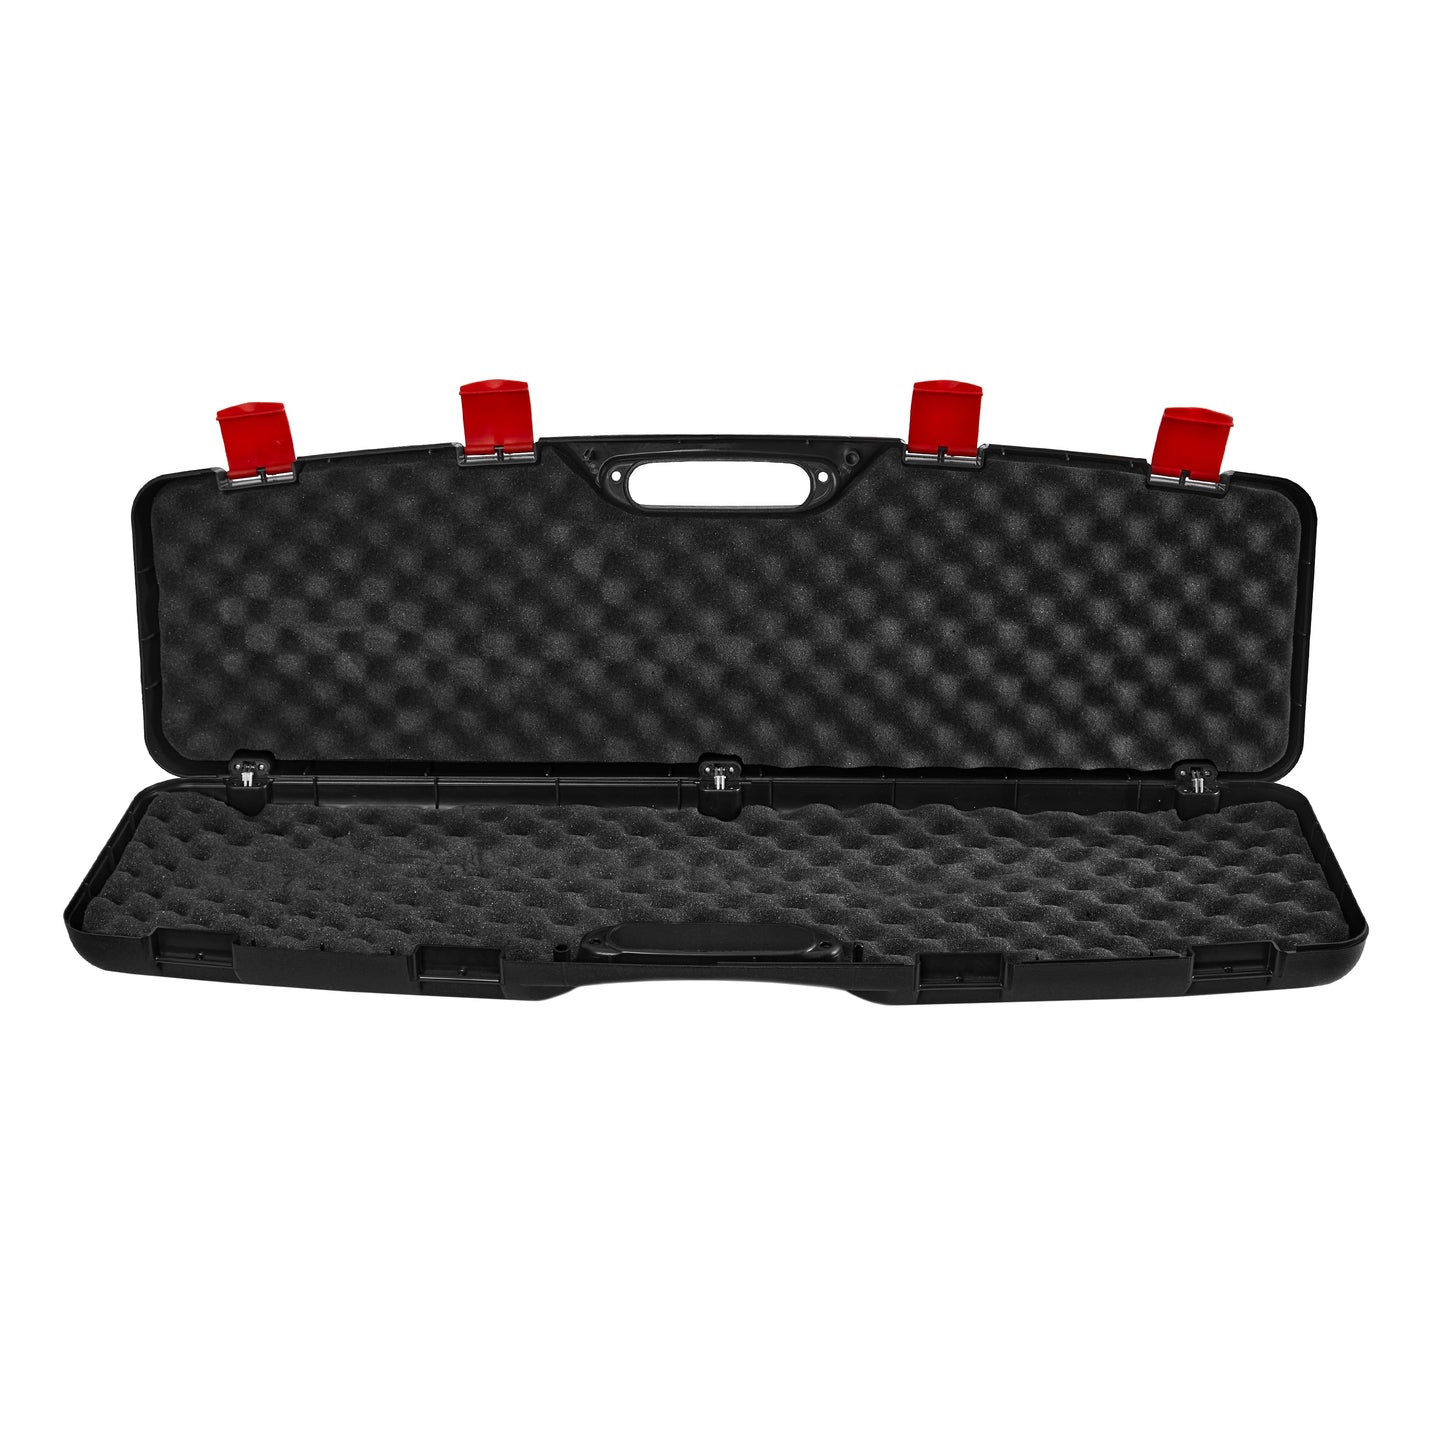 Aselkon Air Rifle Carrying Case - Large